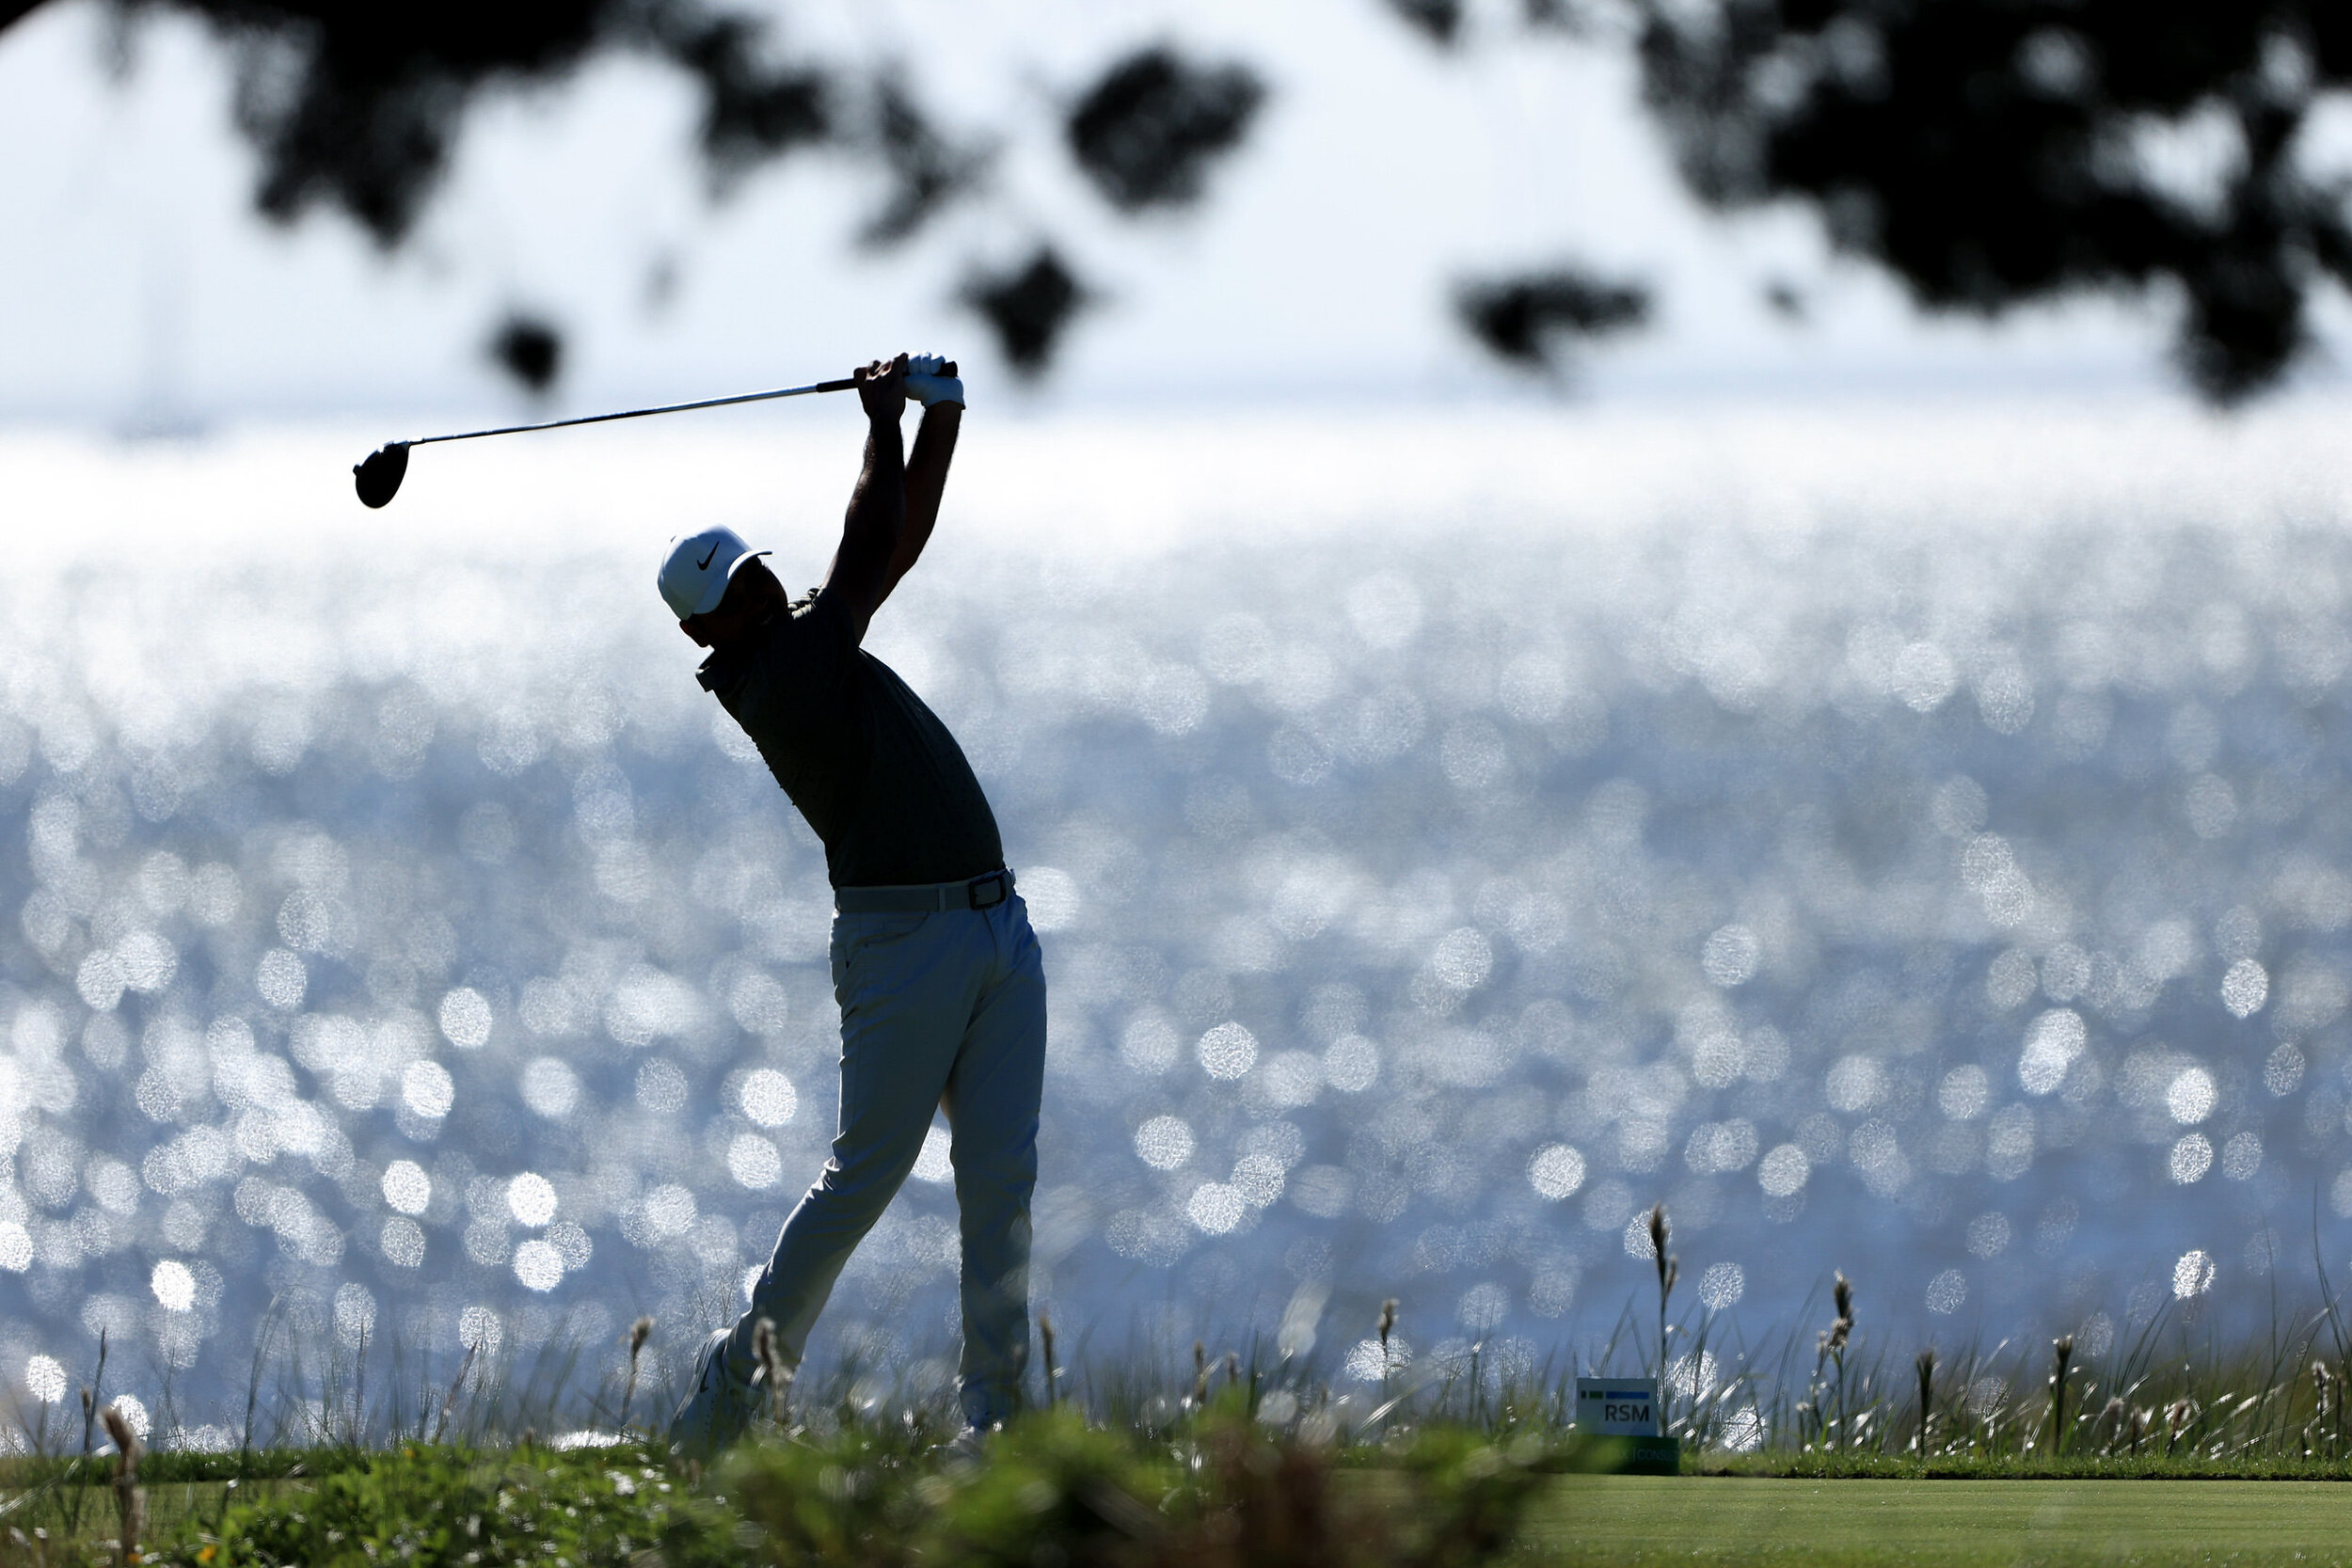  ST SIMONS ISLAND, GEORGIA - NOVEMBER 21: Jason Day of Australia plays his shot from the 14th tee during the third round of The RSM Classic at the Seaside Course at Sea Island Golf Club on November 21, 2020 in St Simons Island, Georgia. (Photo by Sam